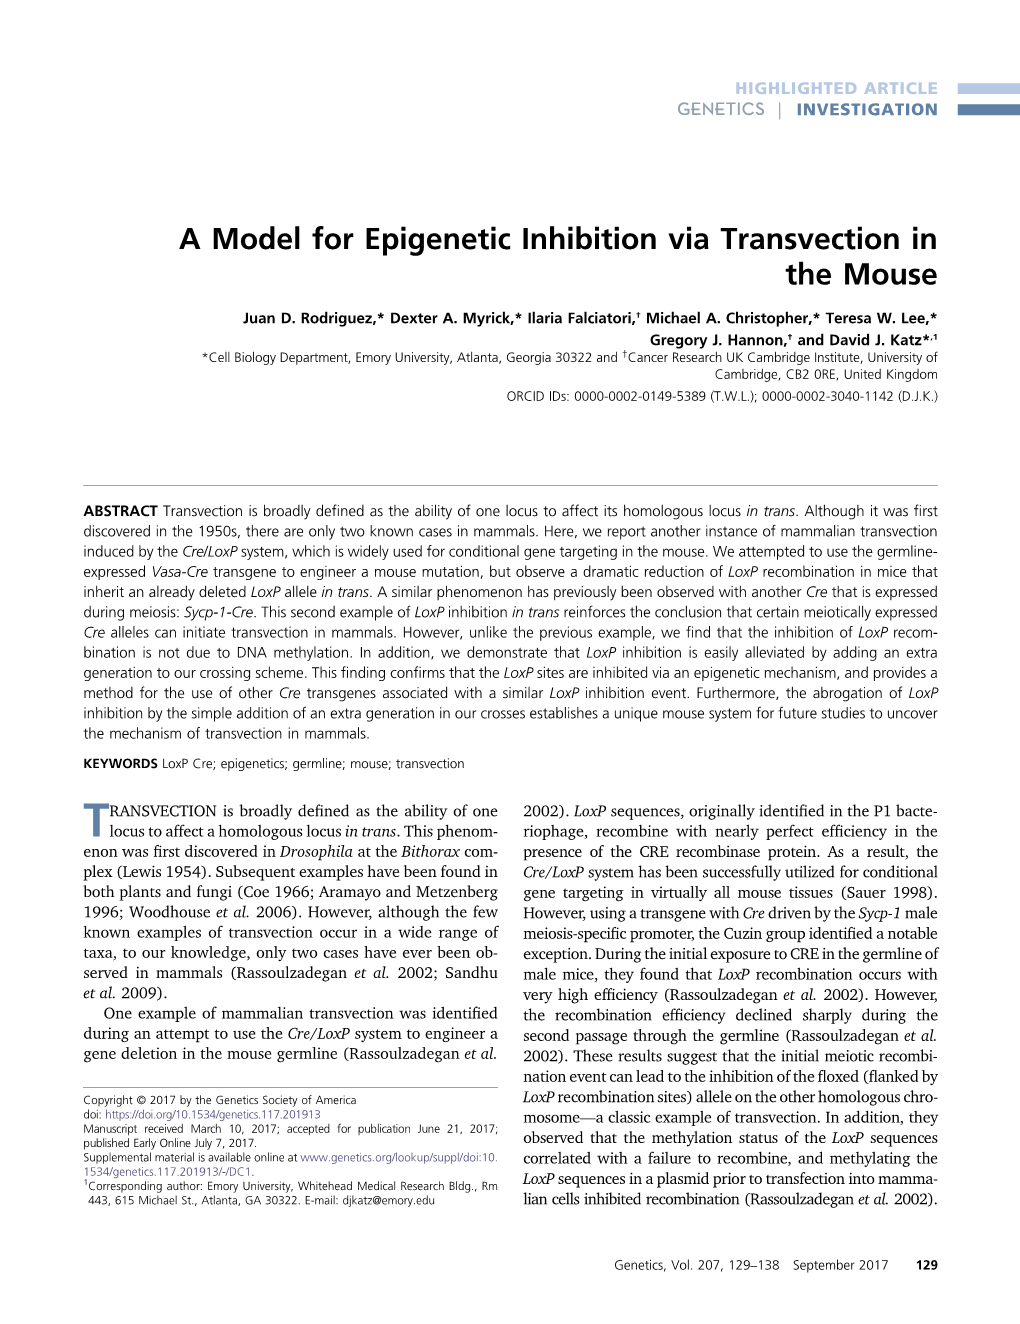 A Model for Epigenetic Inhibition Via Transvection in the Mouse